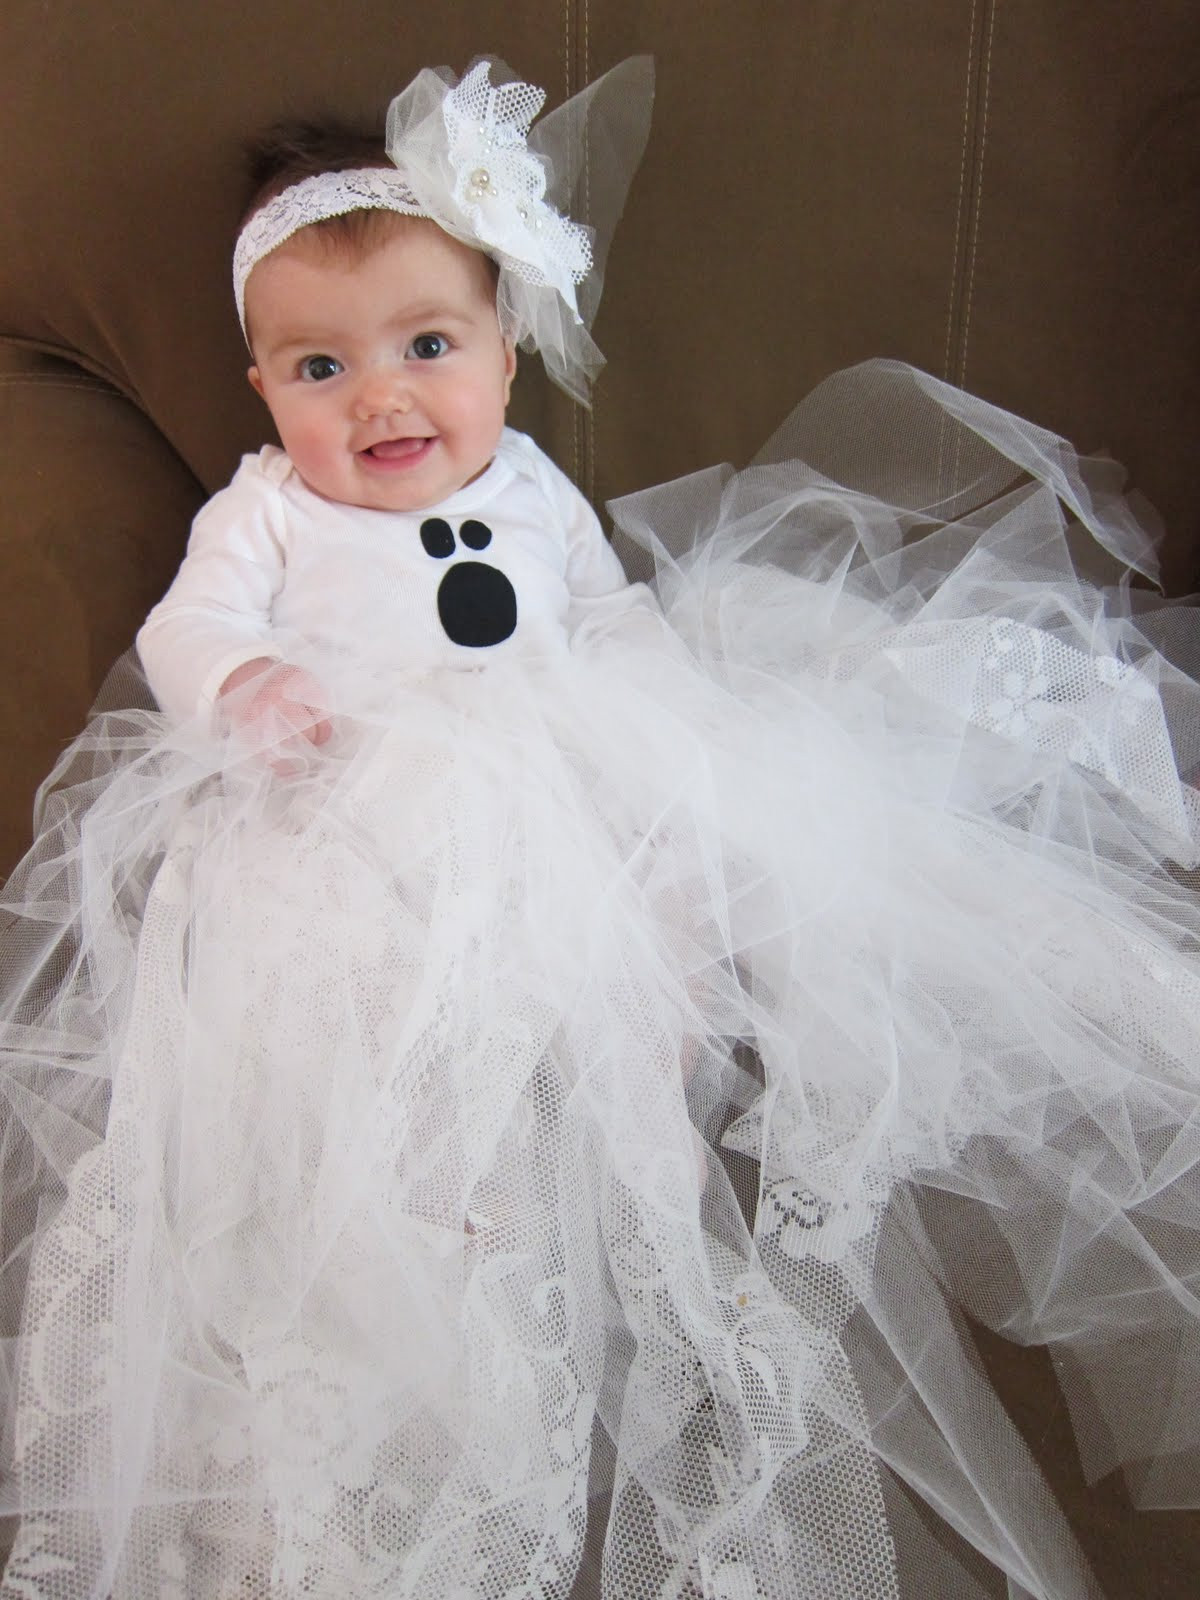 DIY Ghost Costume For Toddler
 do it yourself divas DIY Baby Ghost Halloween Costume